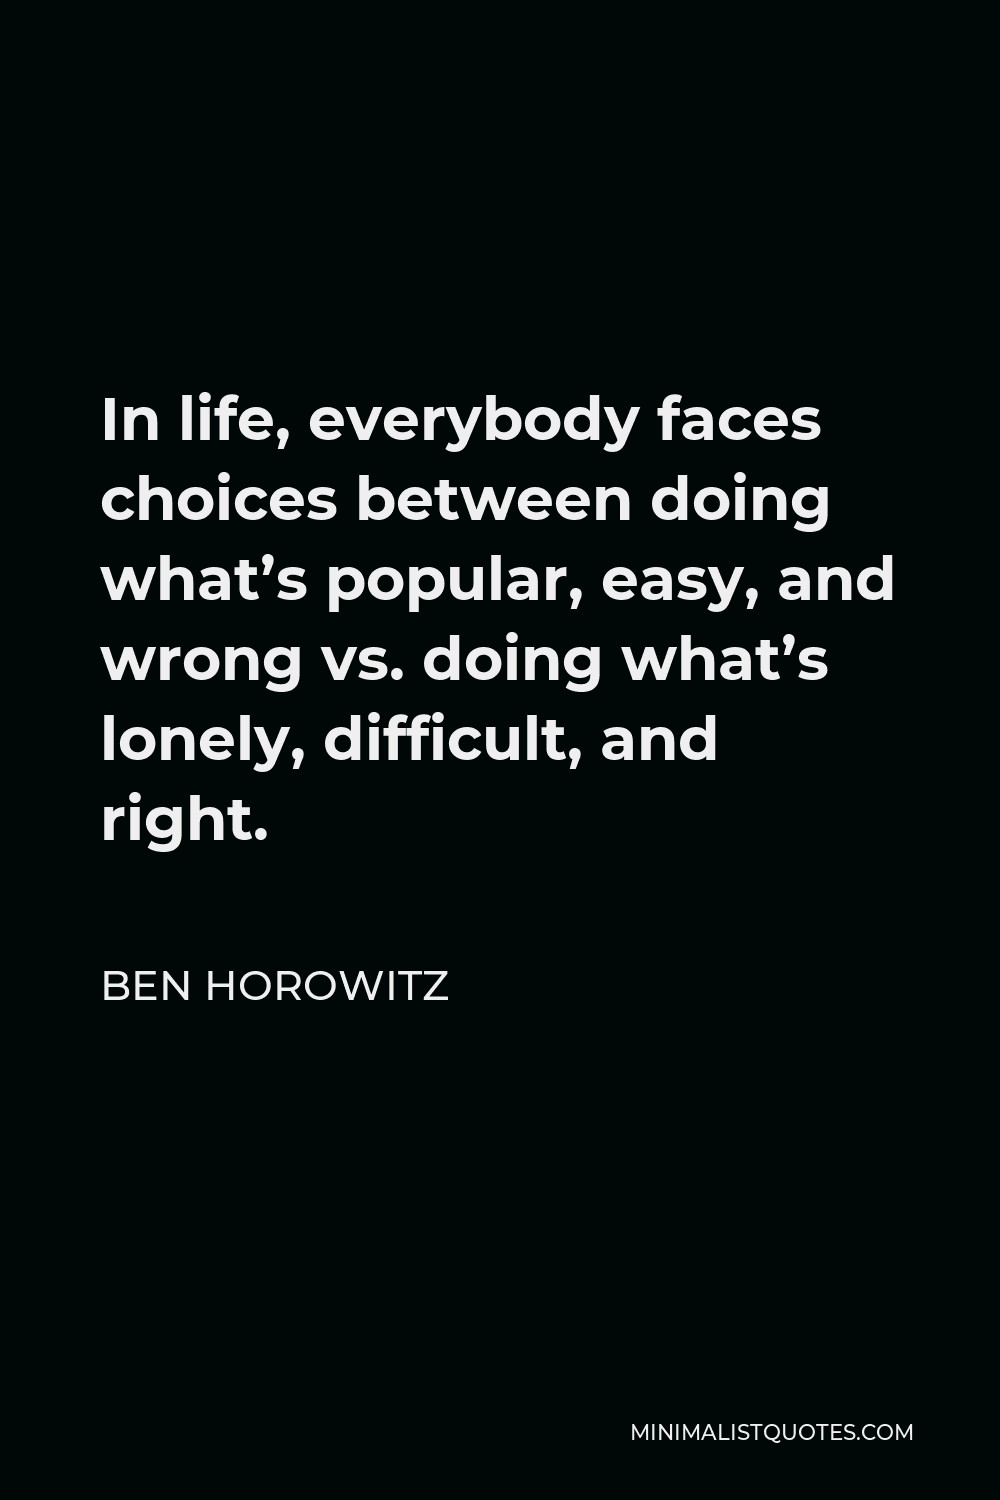 Ben Horowitz Quote - In life, everybody faces choices between doing what’s popular, easy, and wrong vs. doing what’s lonely, difficult, and right.